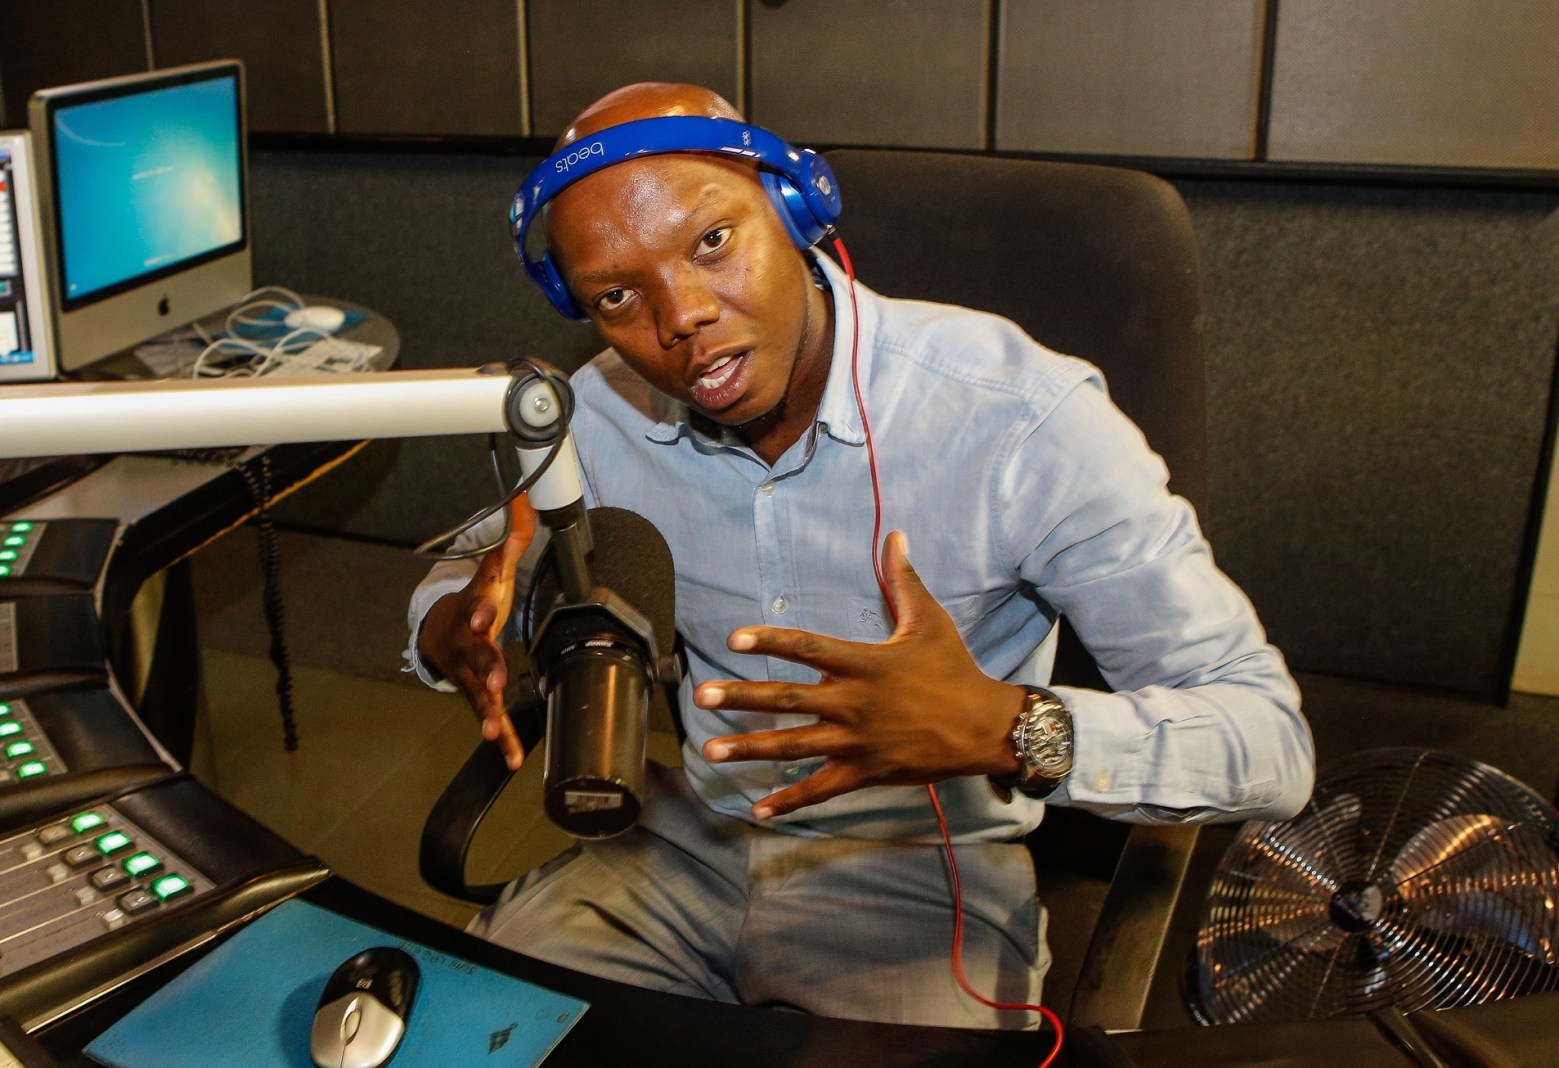 Tbo Touch Named South Africa’s Richest Radio Personality